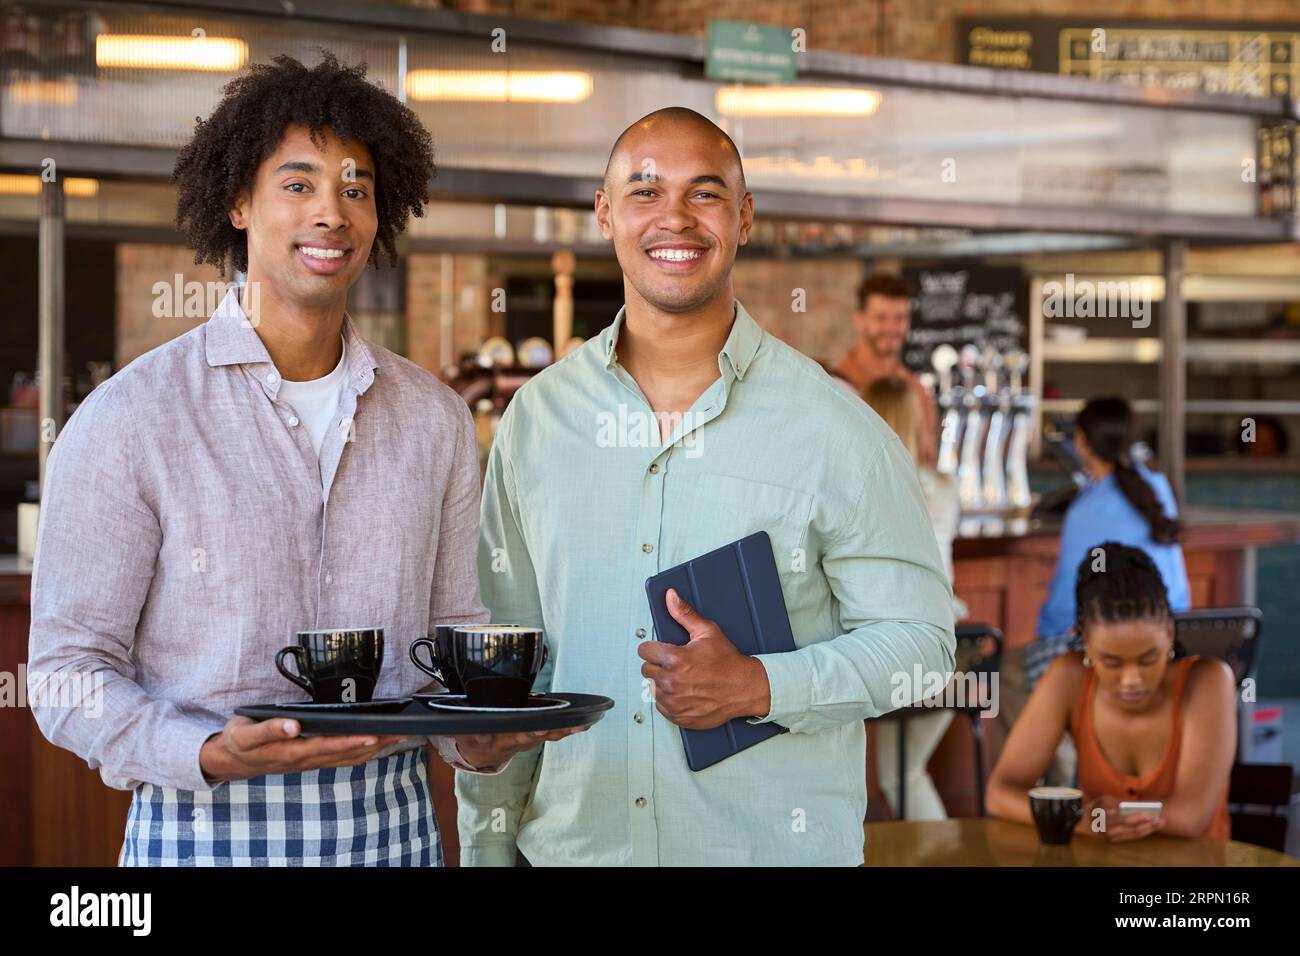 Portrait Of Male Manager With Digital Tablet And Waiter Working In Restaurant Or Coffee Shop Stock Photo